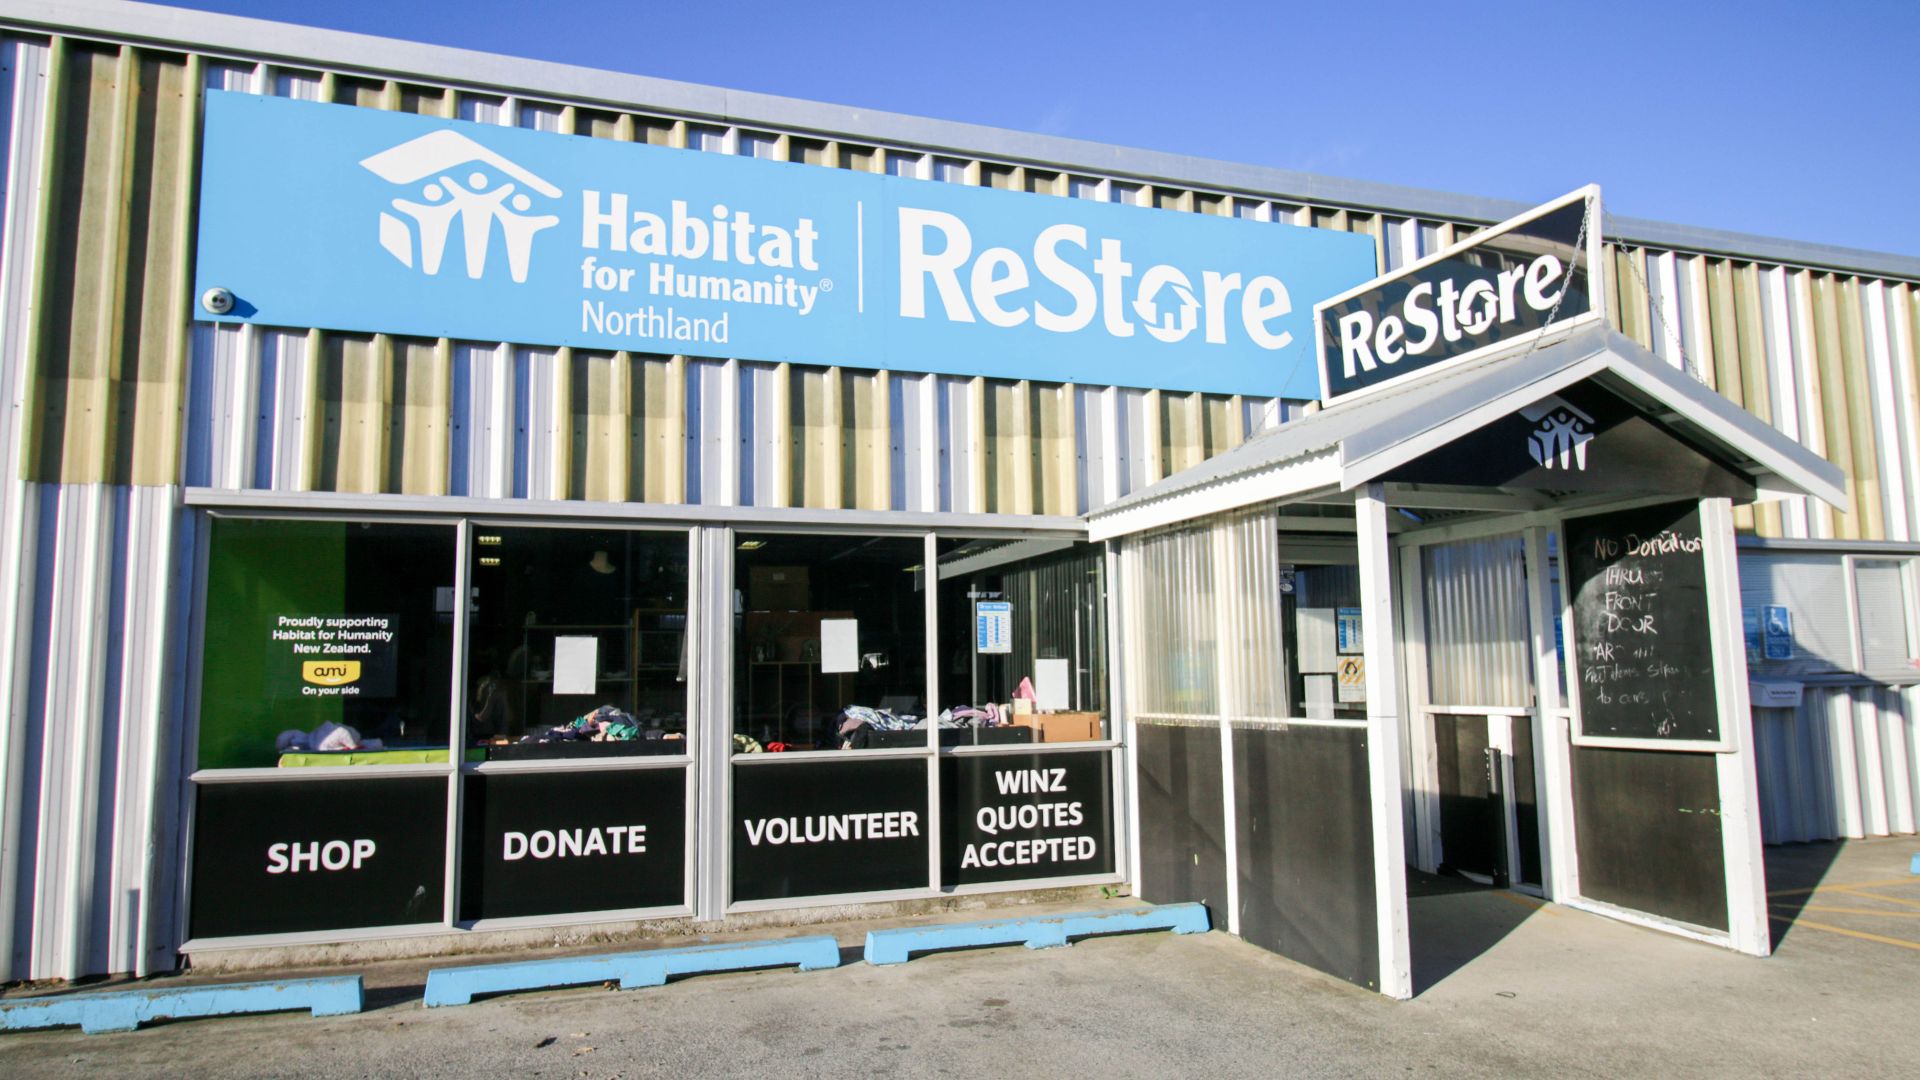 Outside view of the Habitat for Humanity Whangārei ReStore op shop